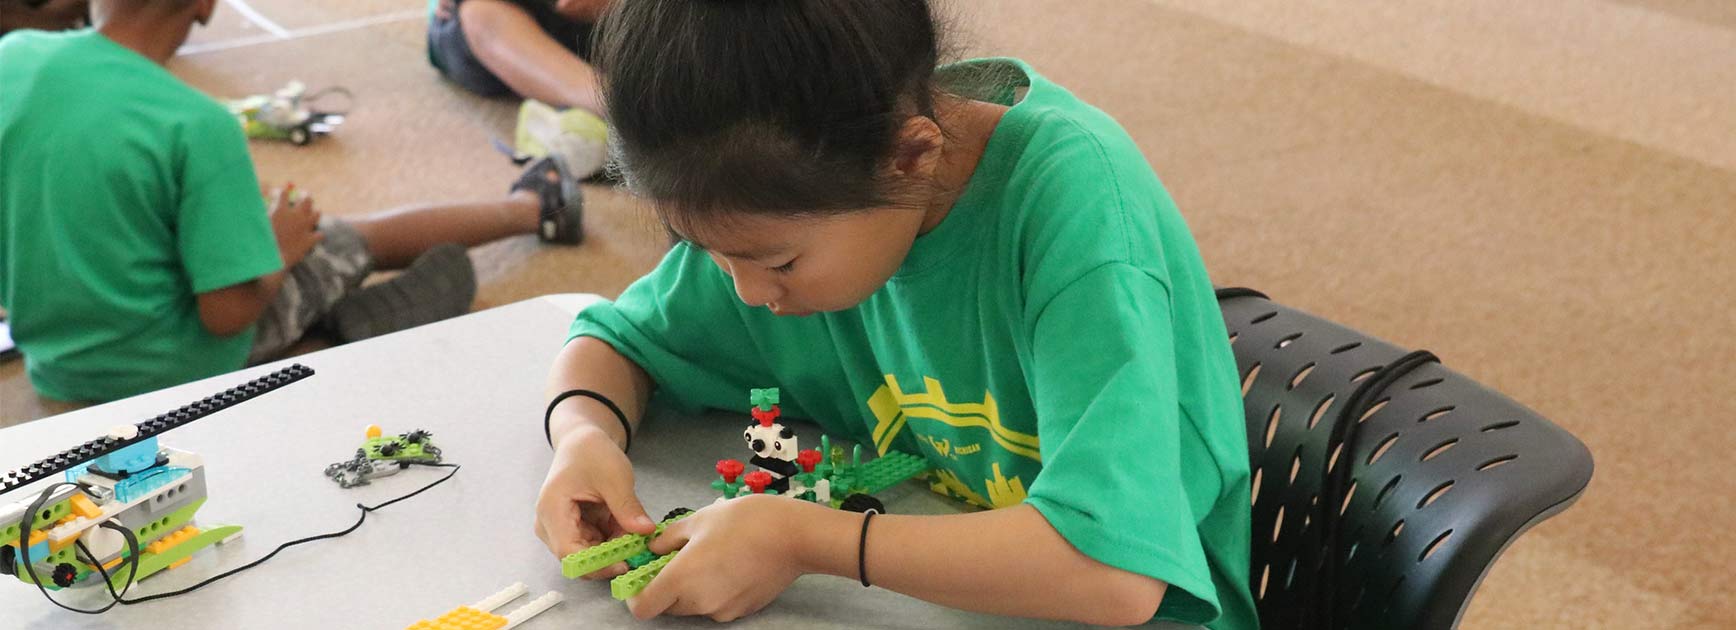 A young person working on a Lego project